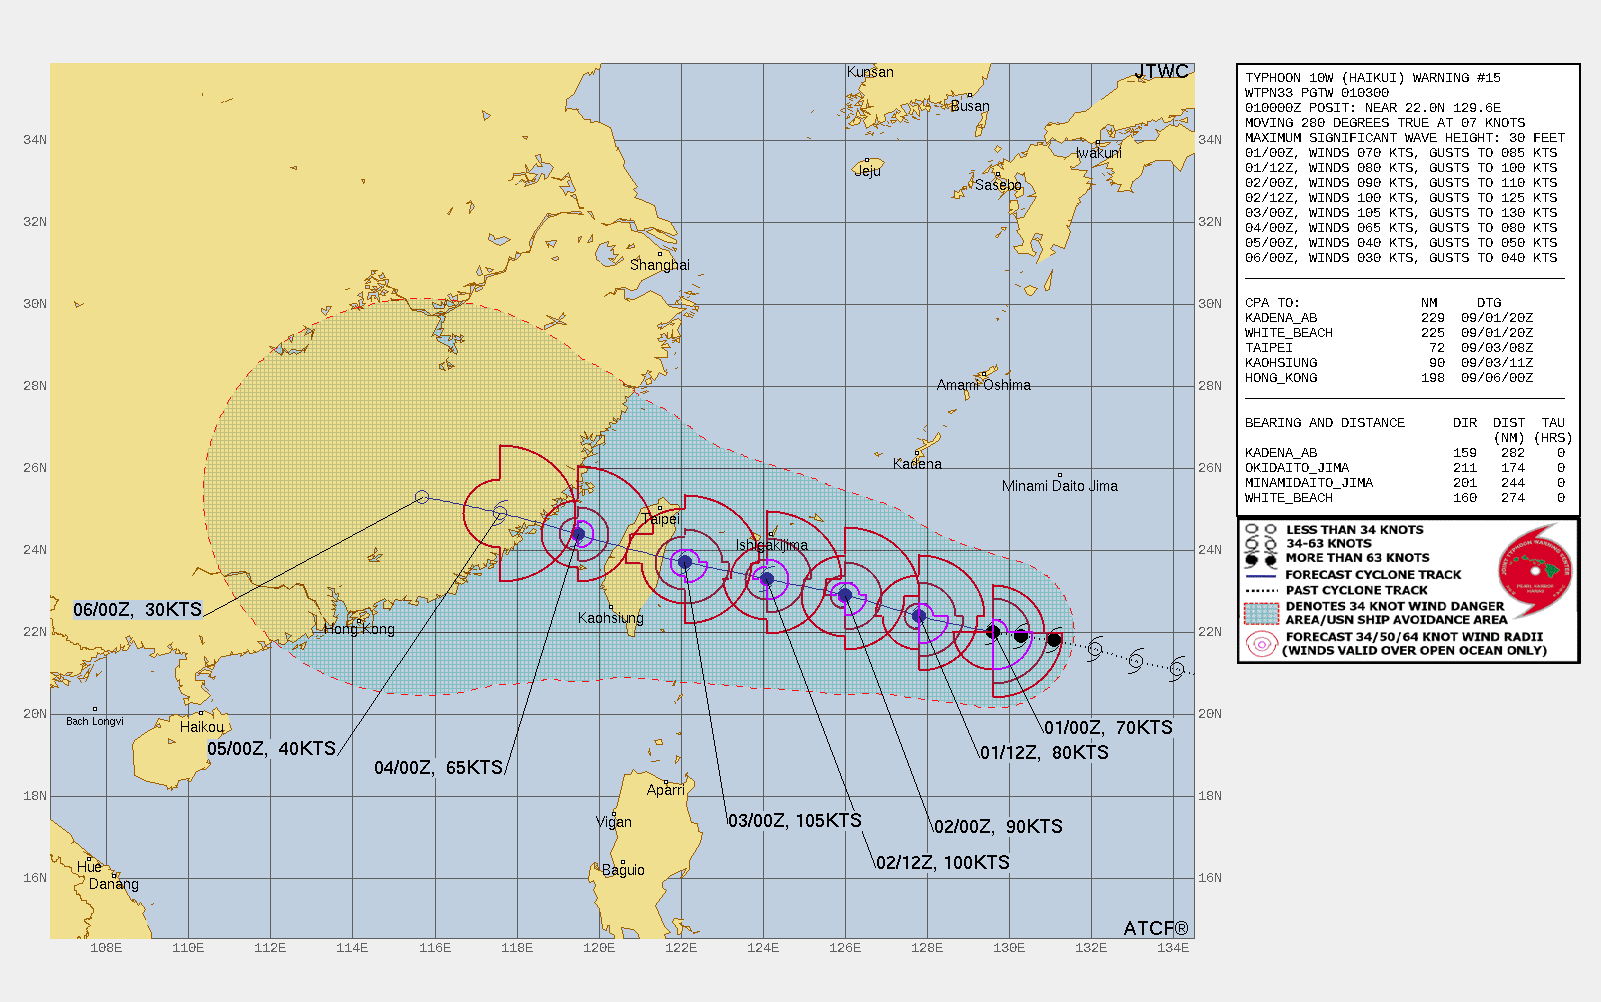 FORECAST REASONING.  SIGNIFICANT FORECAST CHANGES: THERE ARE NO SIGNIFICANT CHANGES TO THE FORECAST FROM THE PREVIOUS WARNING.  FORECAST DISCUSSION: TYPHOON (TY) HAIKUI WILL TRACK WEST-NORTHWESTWARD  ALONG THE SOUTHERN PERIPHERY OF THE STR THROUGH THE FORECAST PERIOD.  TY 10W IS FORECAST TO INTENSIFY STEADILY THROUGH TAU 48 WITH A PEAK  INTENSITY OF 105 KNOTS BY TAU 48 THEN IT WILL WEAKEN QUICKLY AS THE  SYSTEM APPROACHES TAIWAN. TY 10W WILL CONTINUE TO WEAKEN SIGNIFICANTLY  AS IT CROSSES THE MOUNTAINOUS TERRAIN OF TAIWAN WITH FURTHER WEAKENING  AS IT TRACKS OVER SOUTHEAST CHINA.